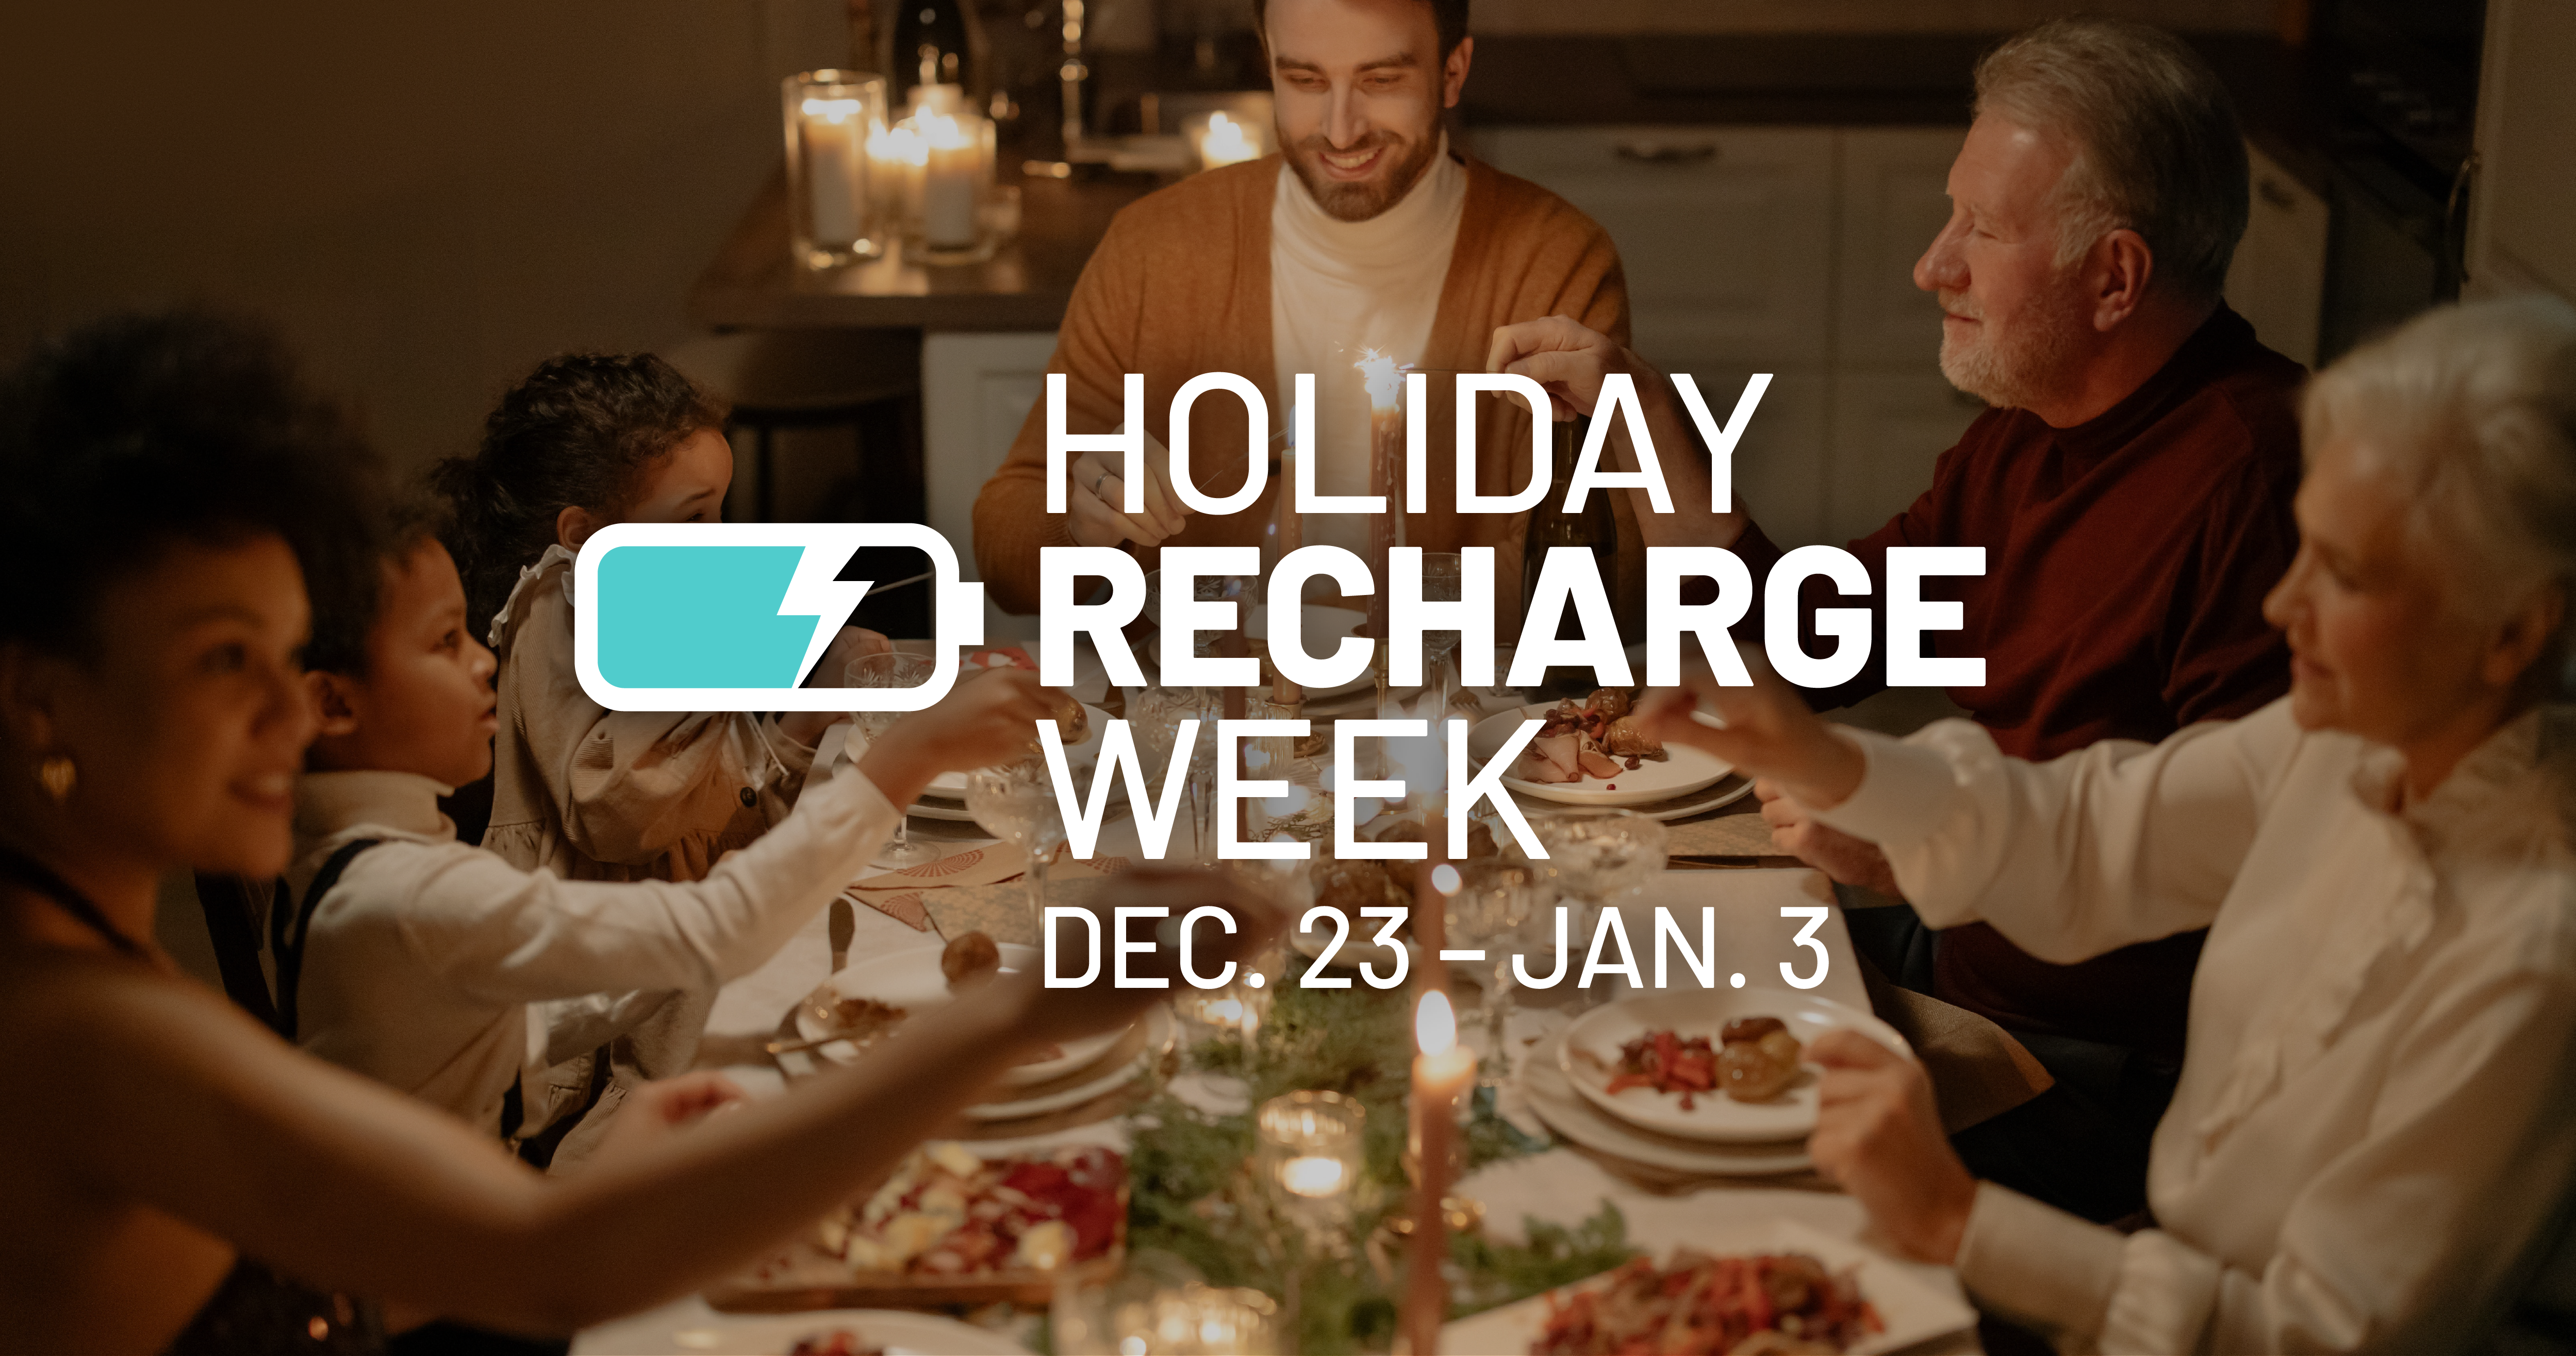 SmartSimple Holiday Recharge Week for Employees is Back, Dec 23 - Jan 3